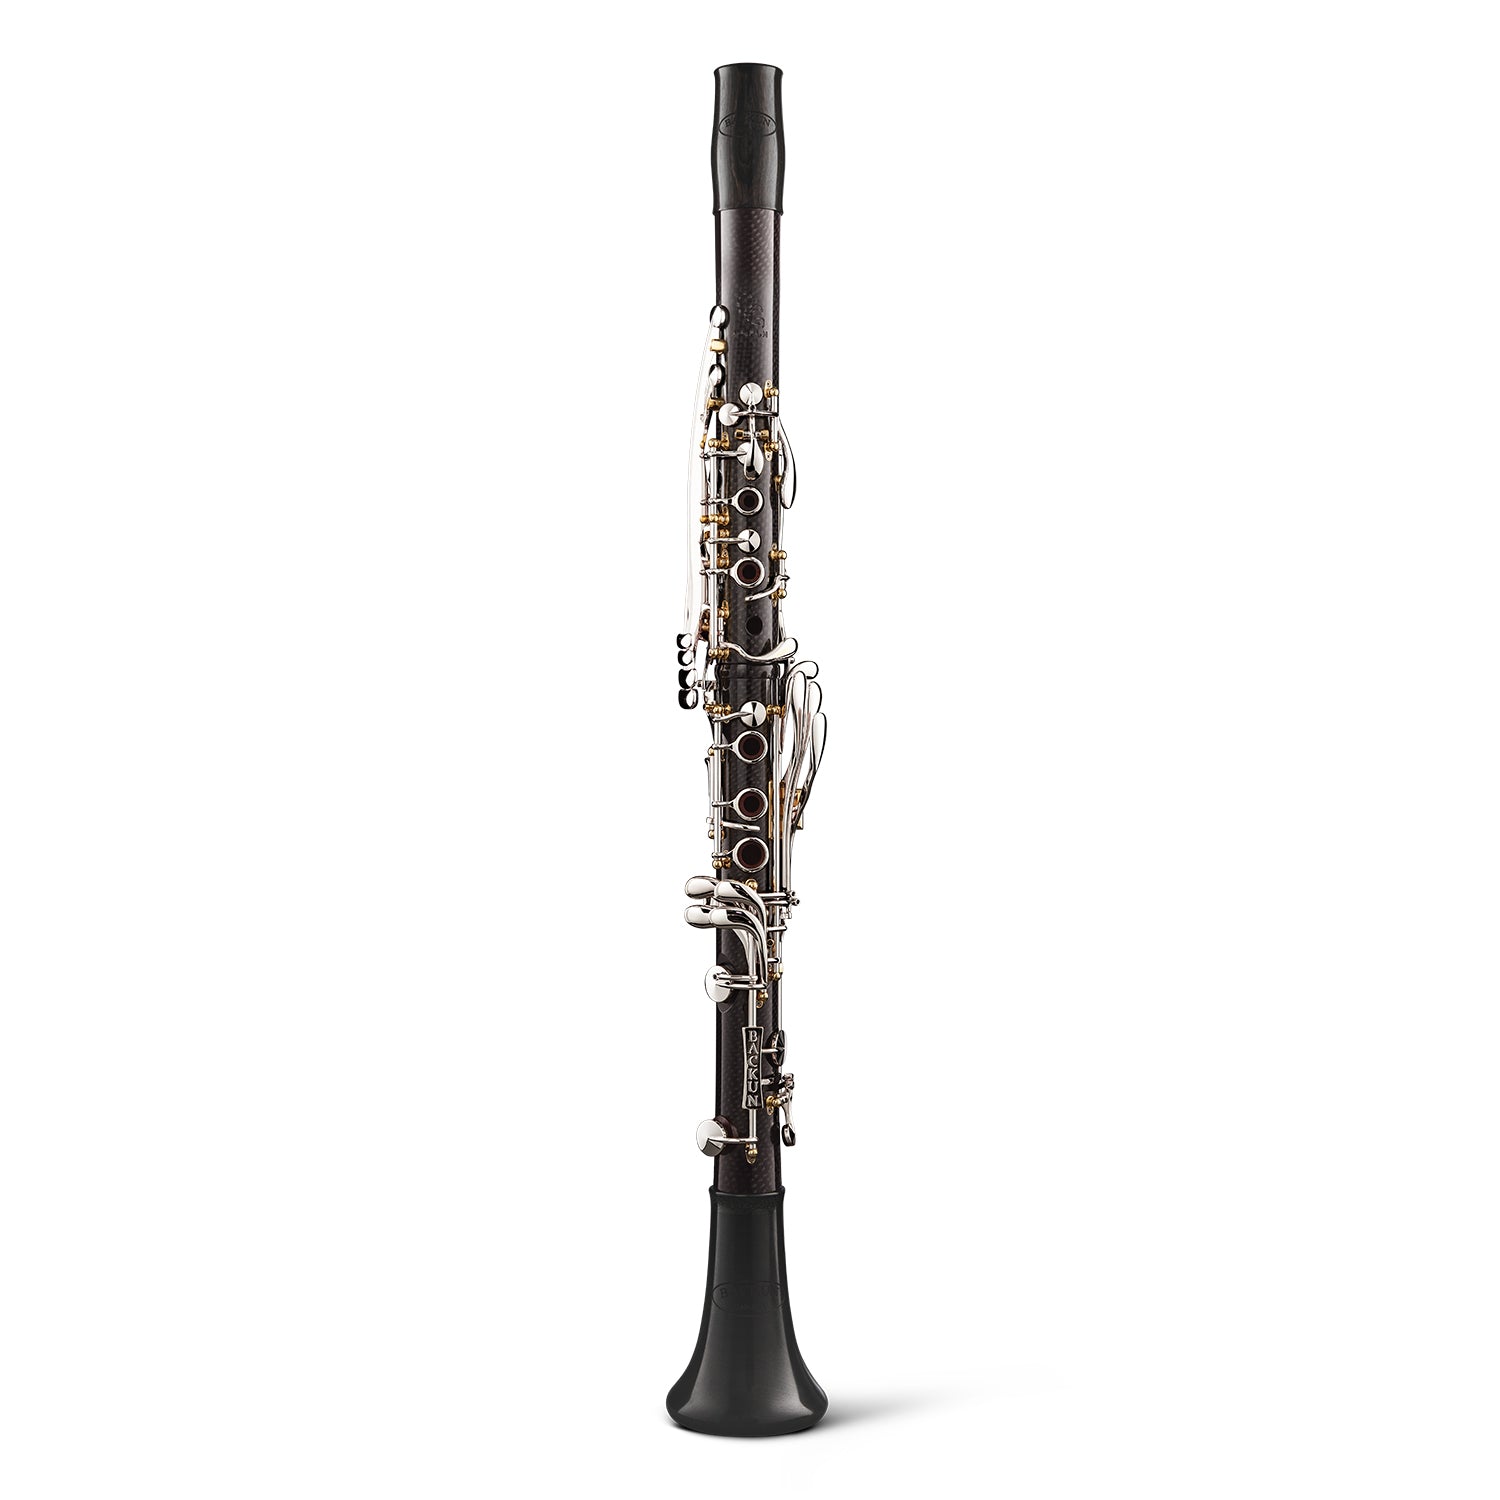 backun-a-clarinet-CG-carbon-grenadilla-silver-with-gold-posts-front